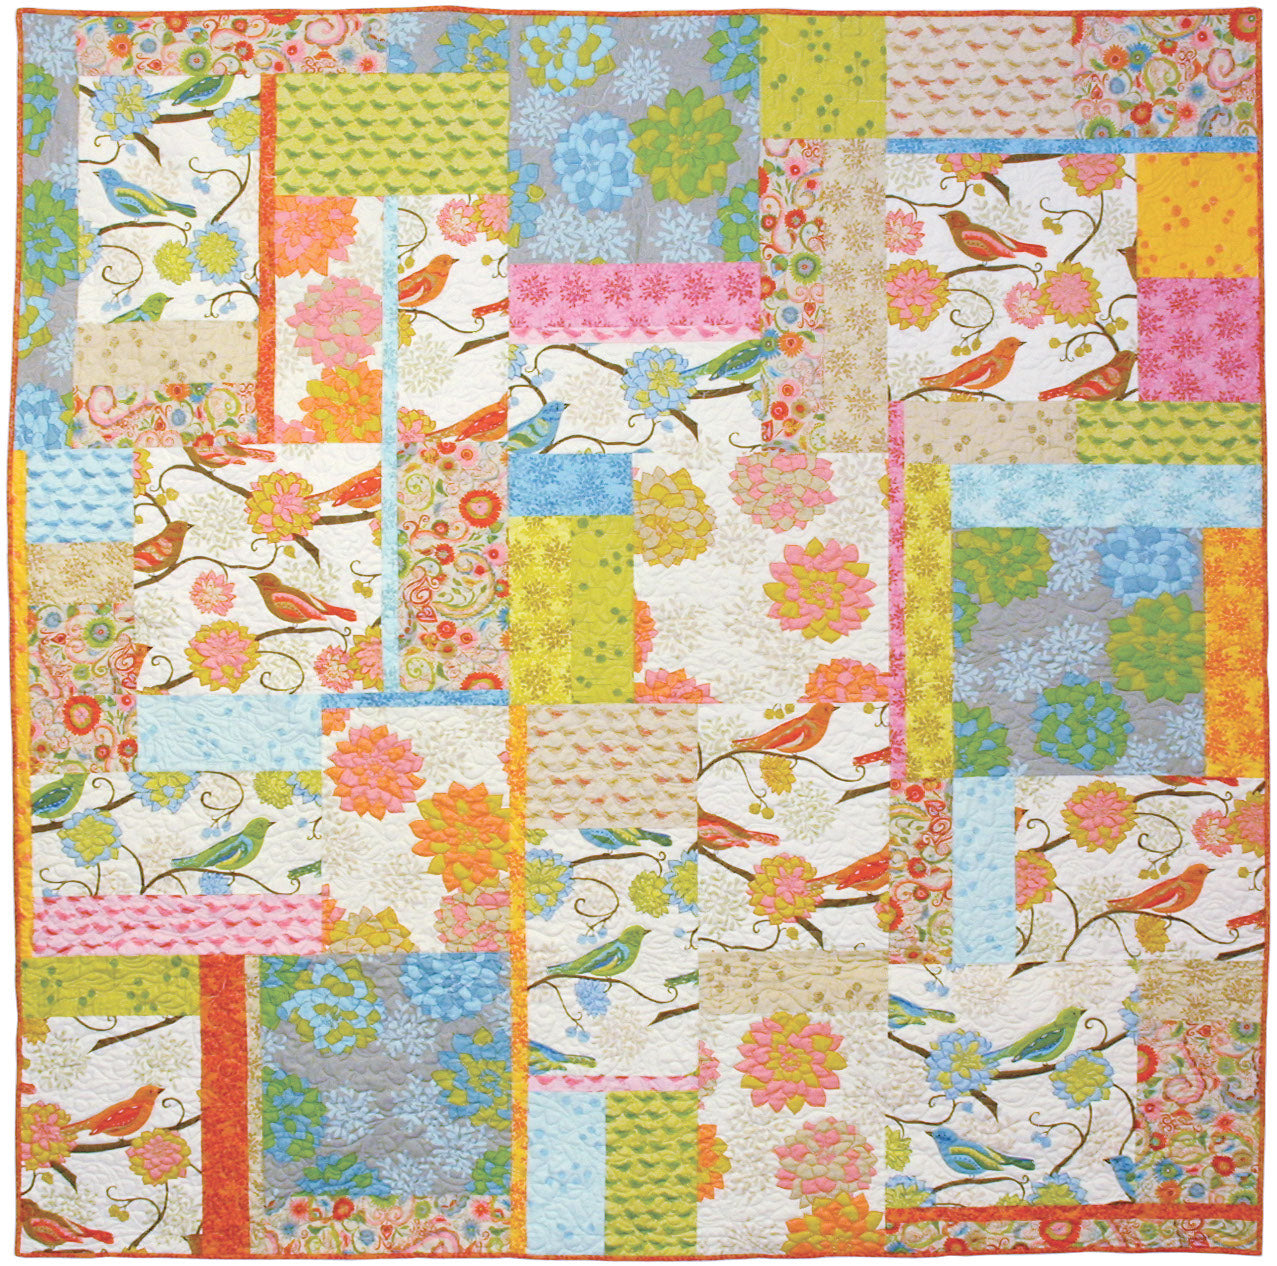 Nest Quilt - Free Downloadable Quilting Pattern by Valori Wells